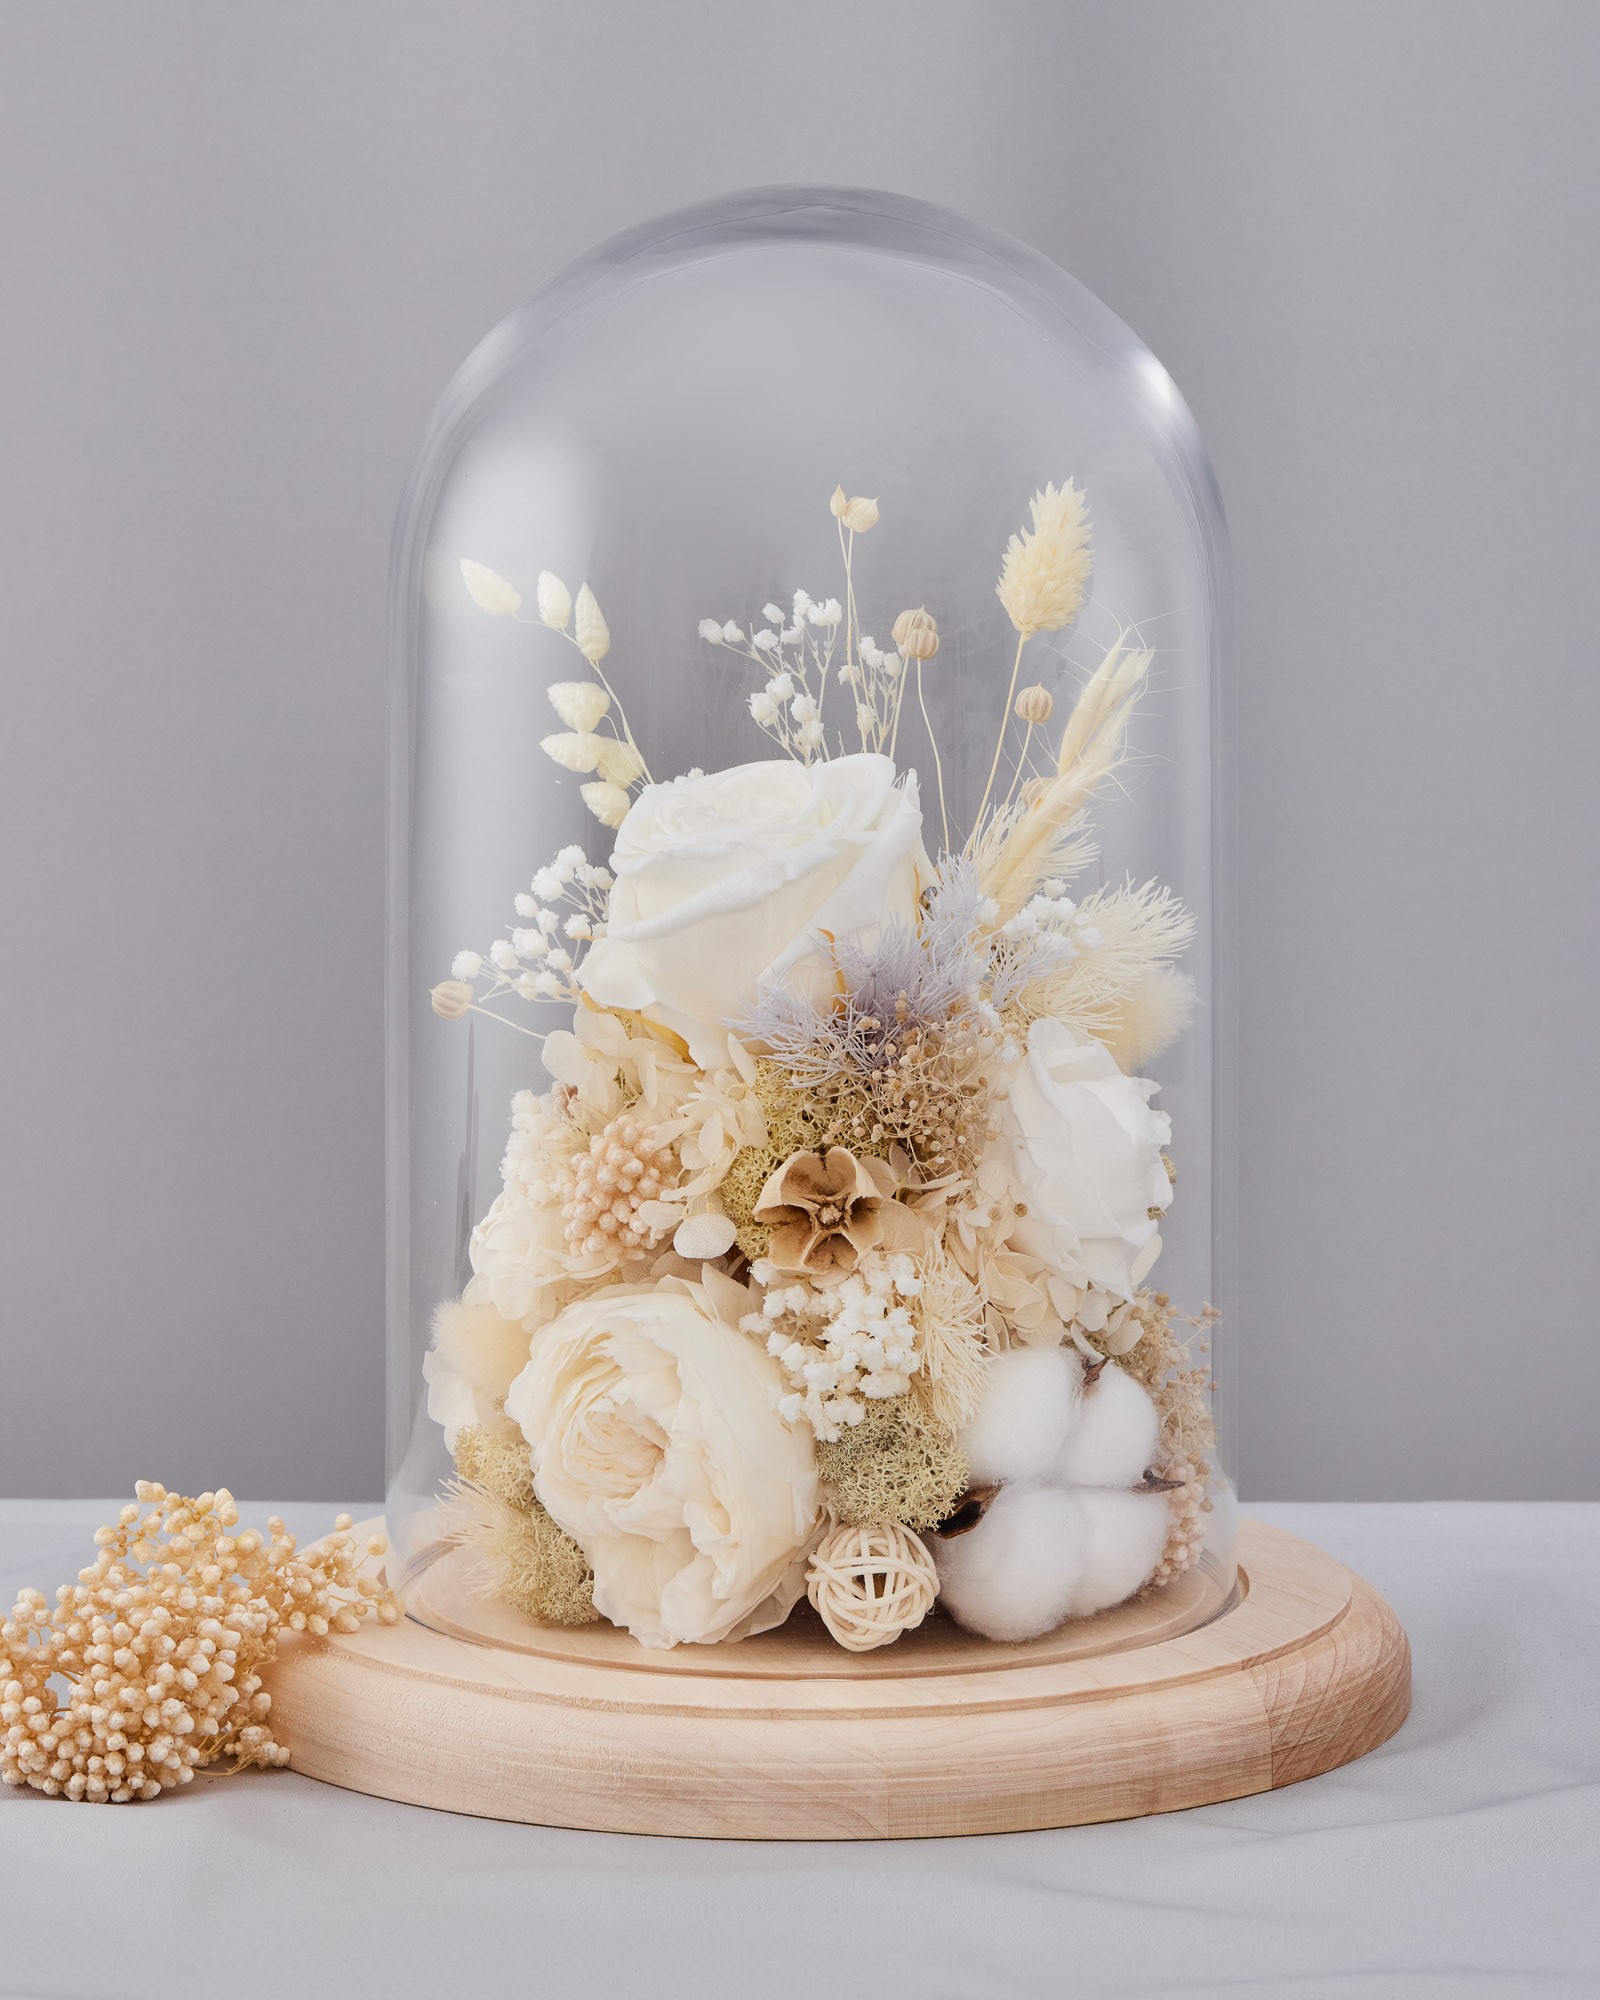 Flowers in glass dome "Tenderness of touch"